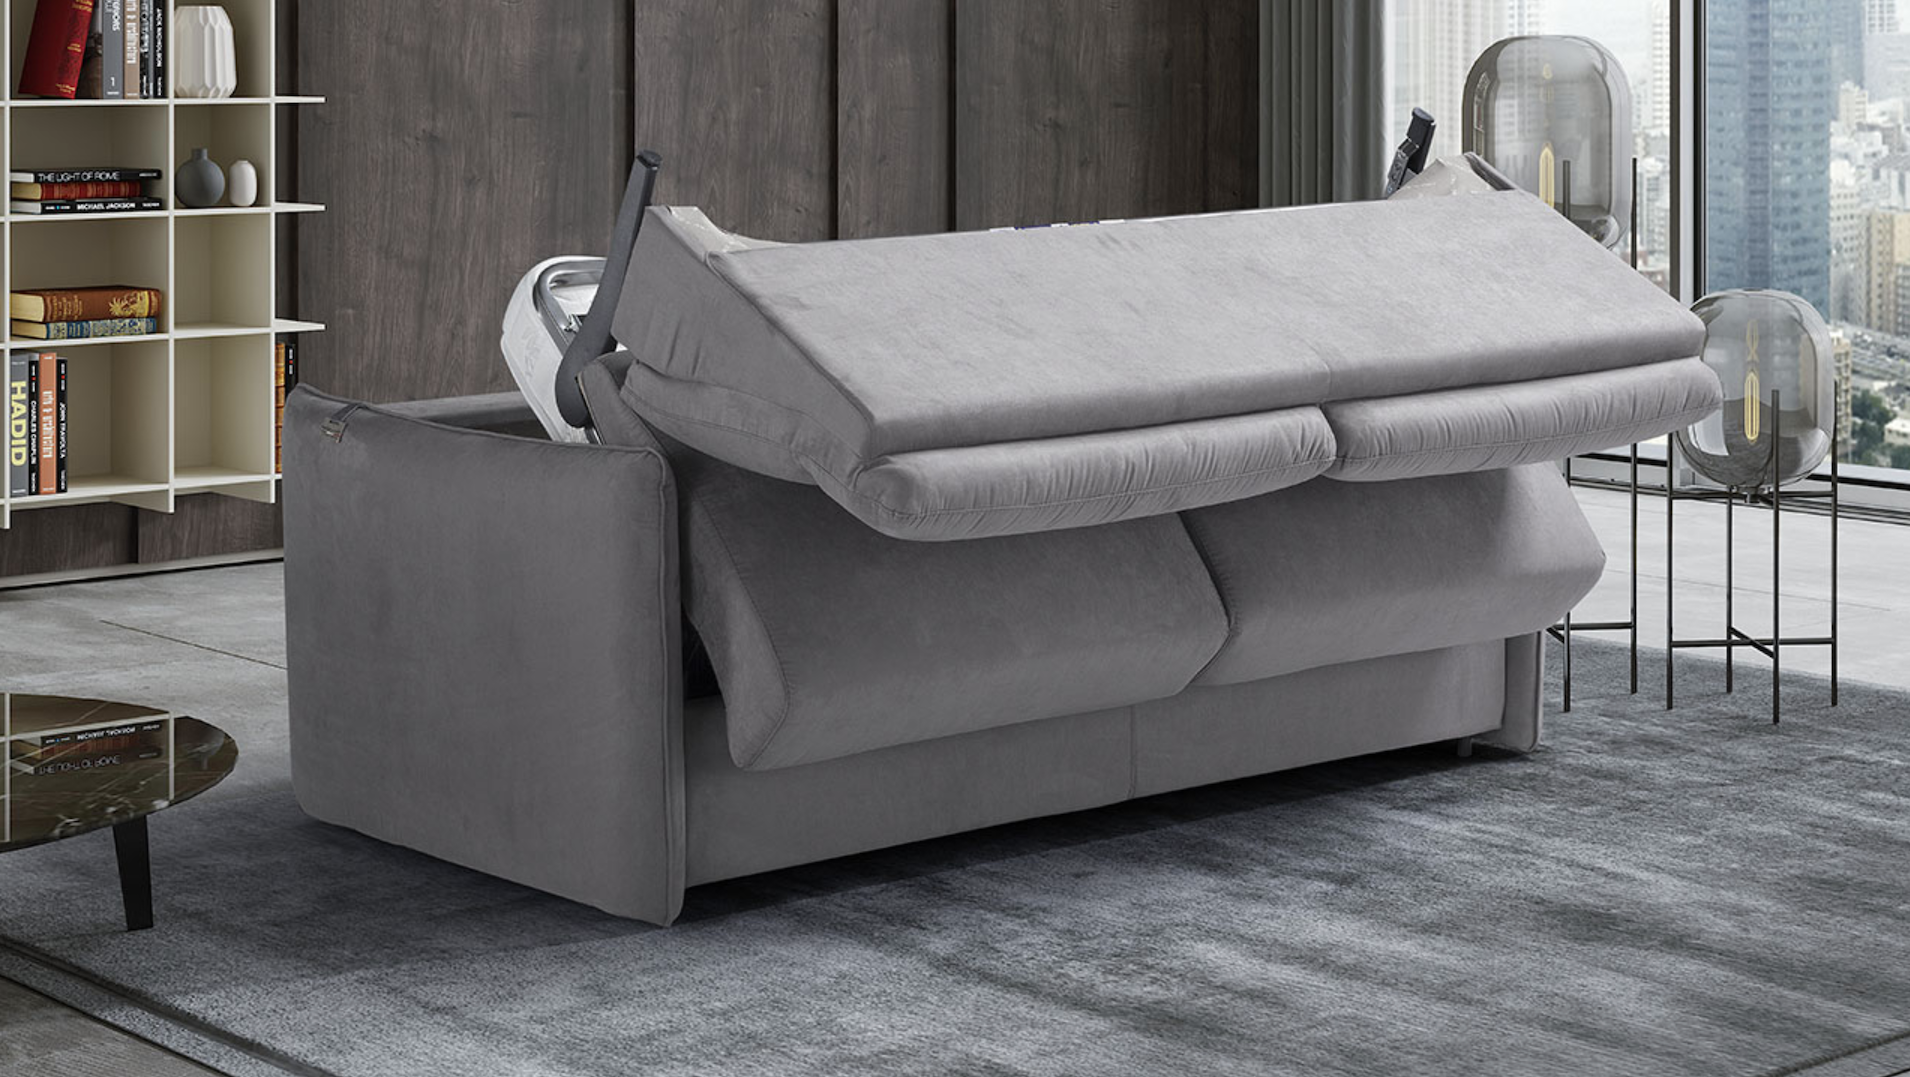 AIMEE Italian Crafted 3 Seat Sofa Bed in PLAZA GREY. RRP £1979 - Image 5 of 5